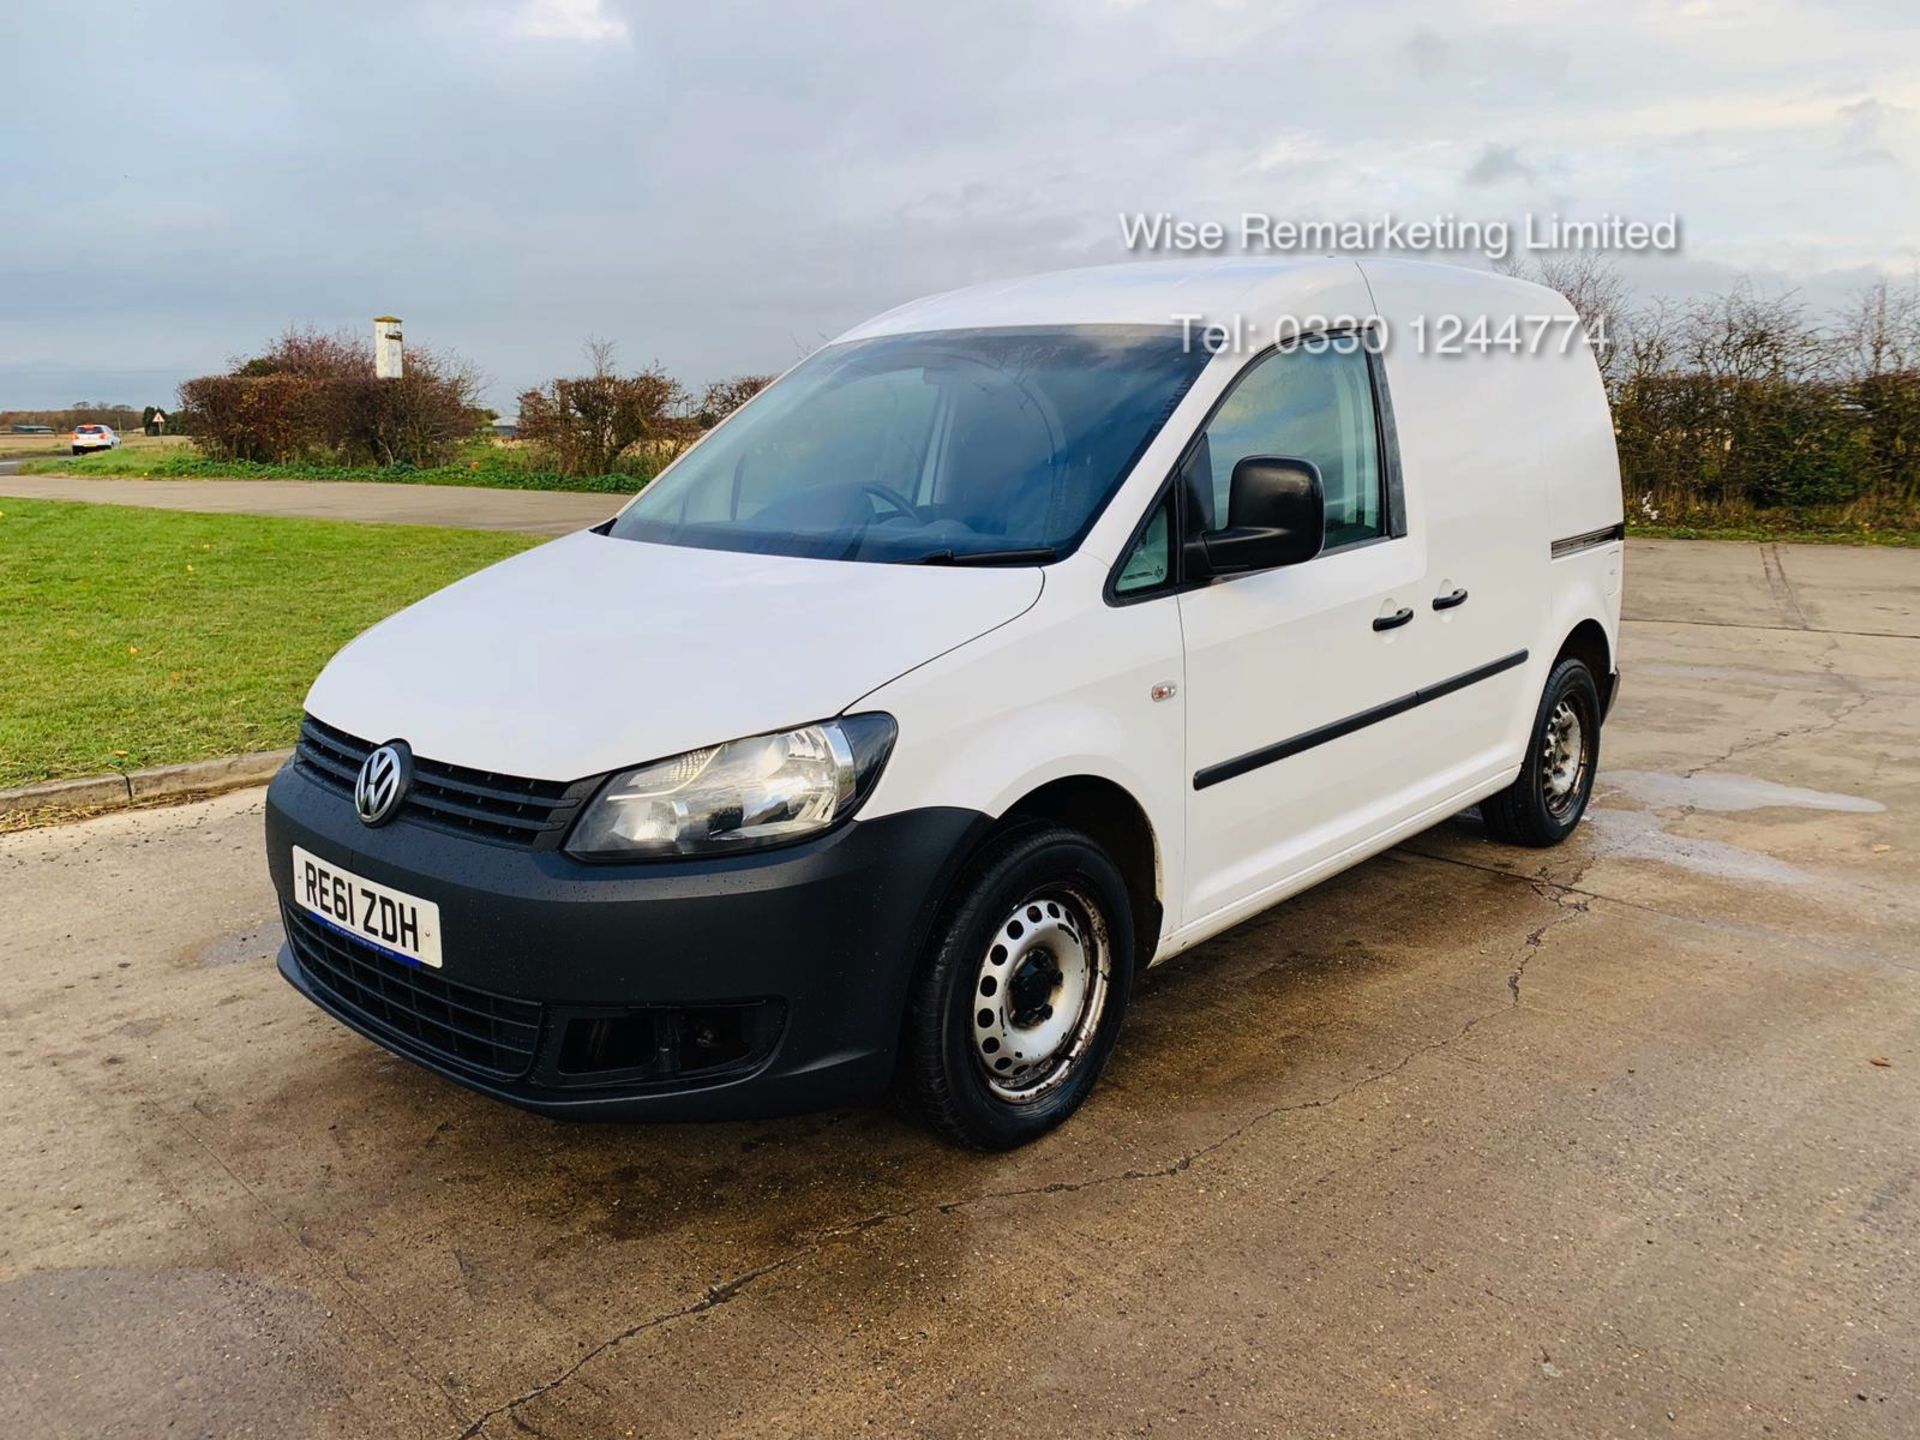 Volkswagen Caddy C20 1.6 TDI - 2012 Model - 1 Keeper From New - Side Loading Door - Ply Lined